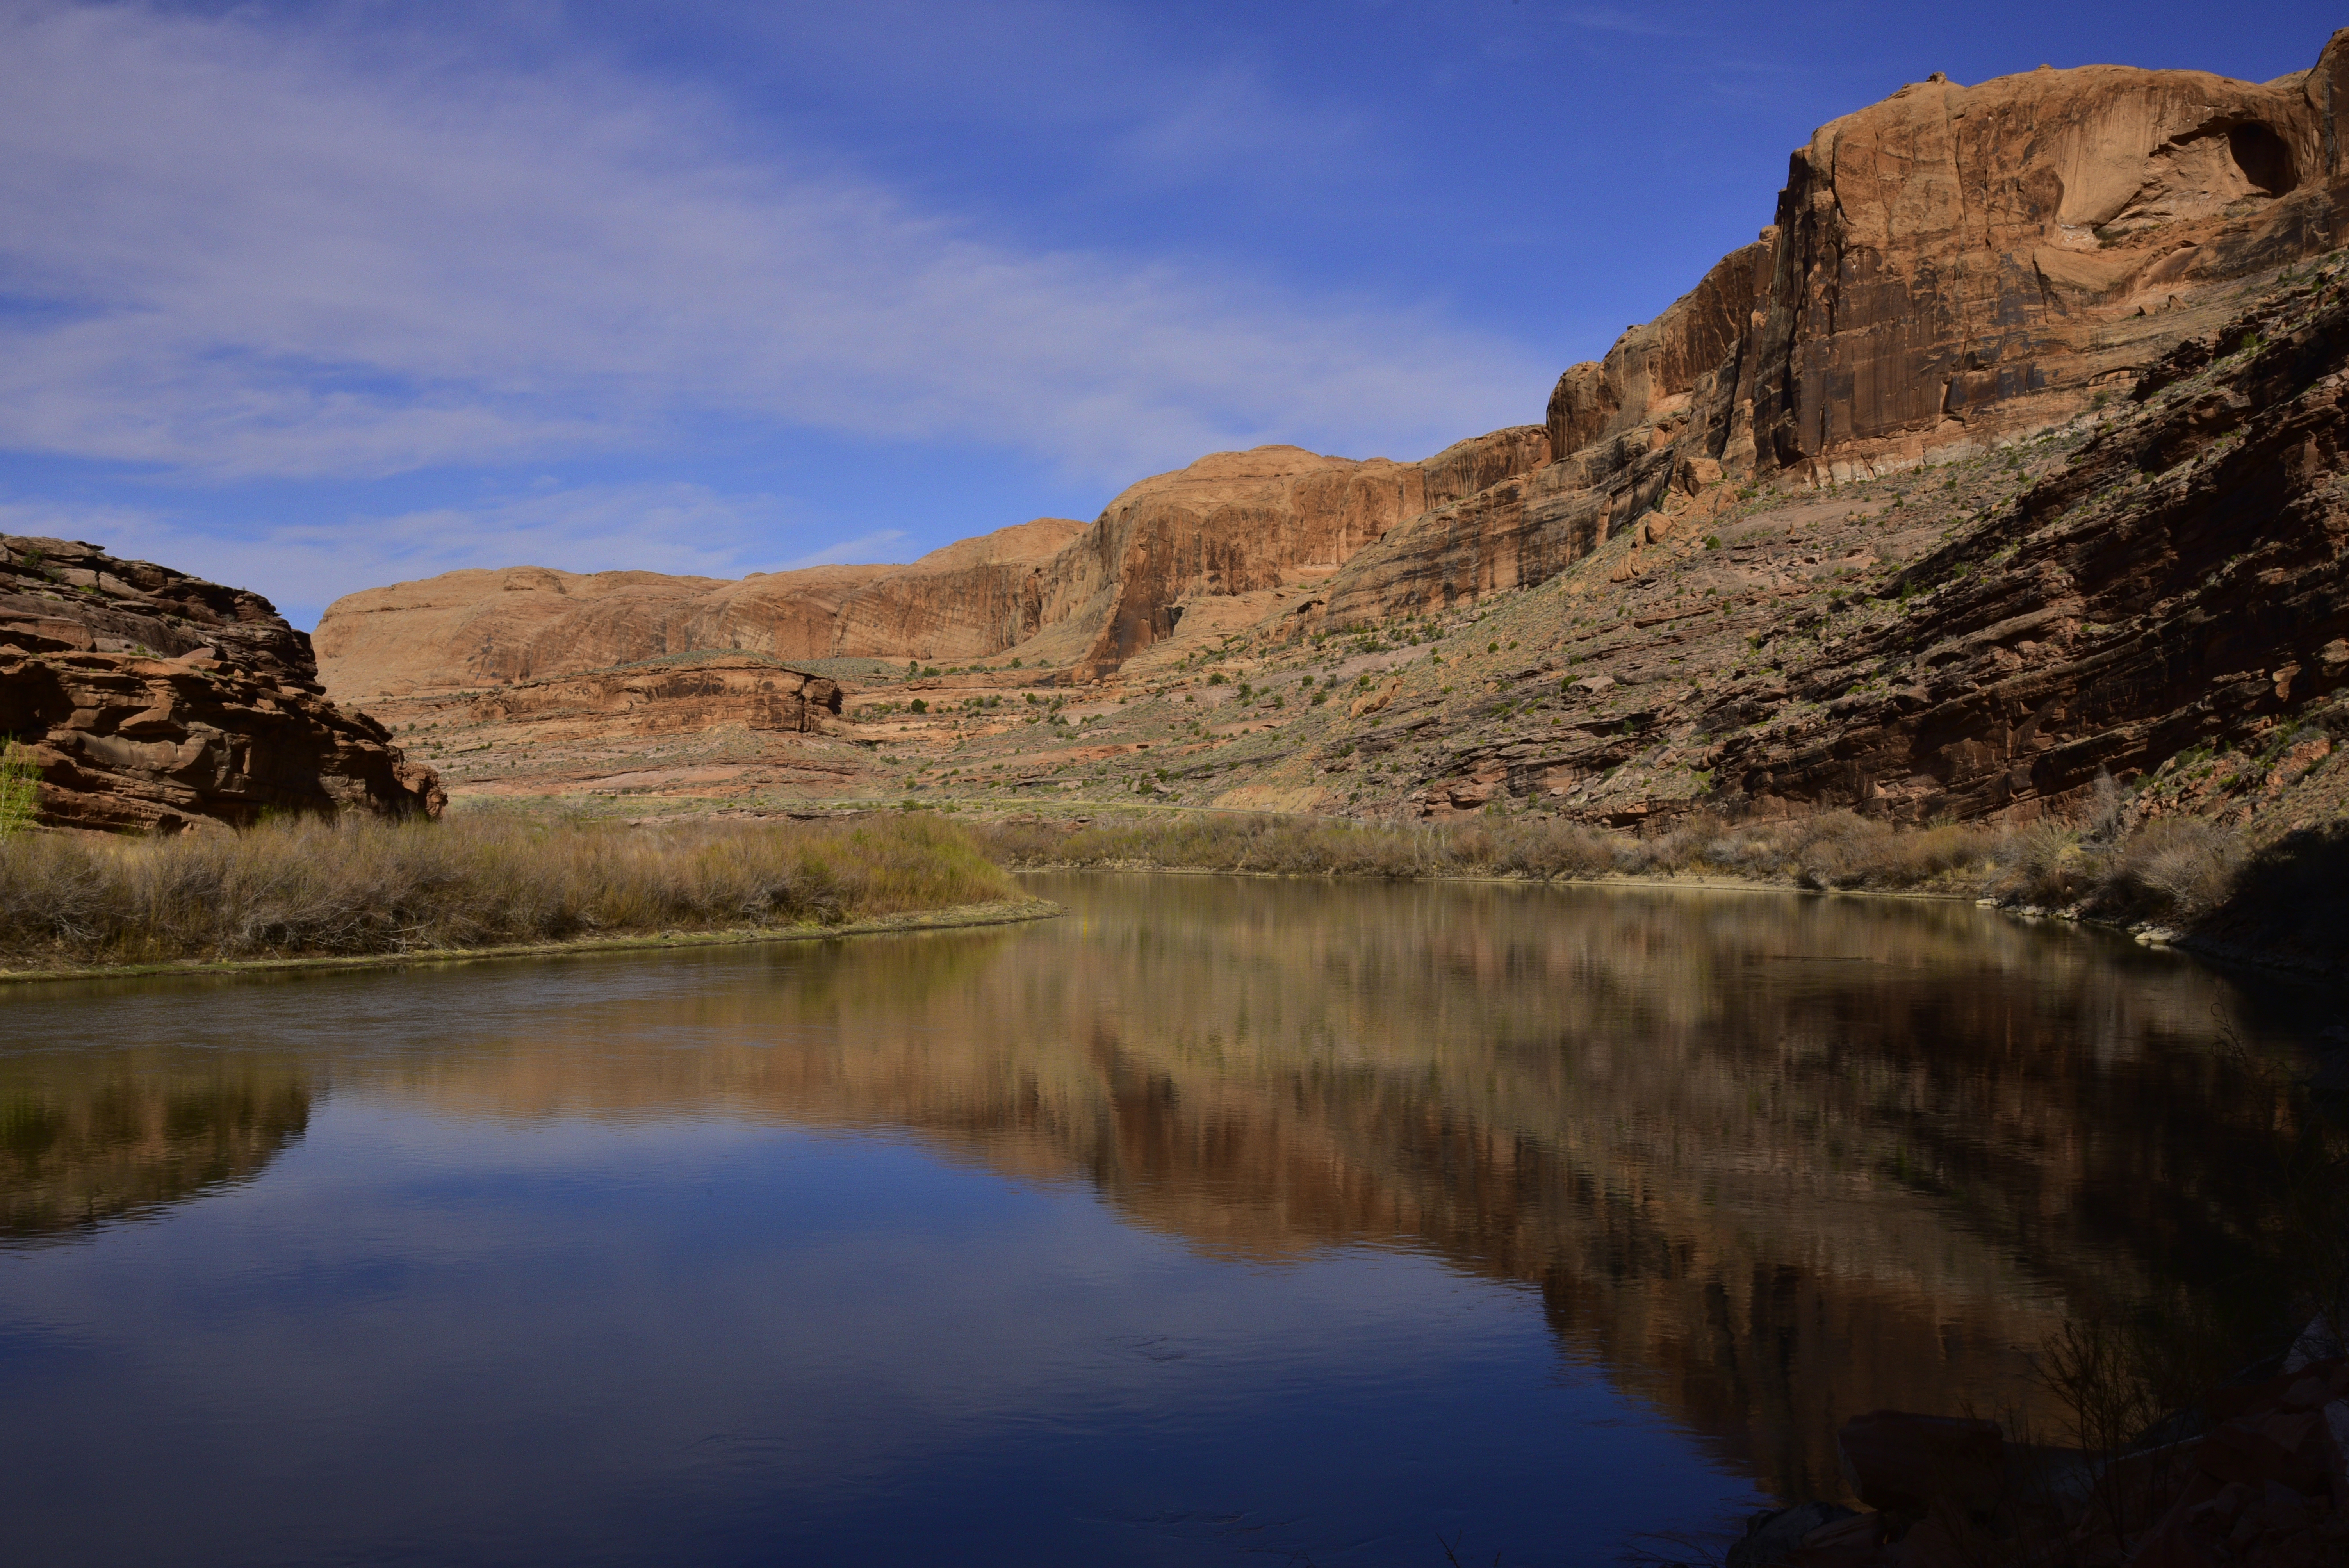 Late afternoon reflection in the Colorado River  -  Utah 128, Grand County, Utah